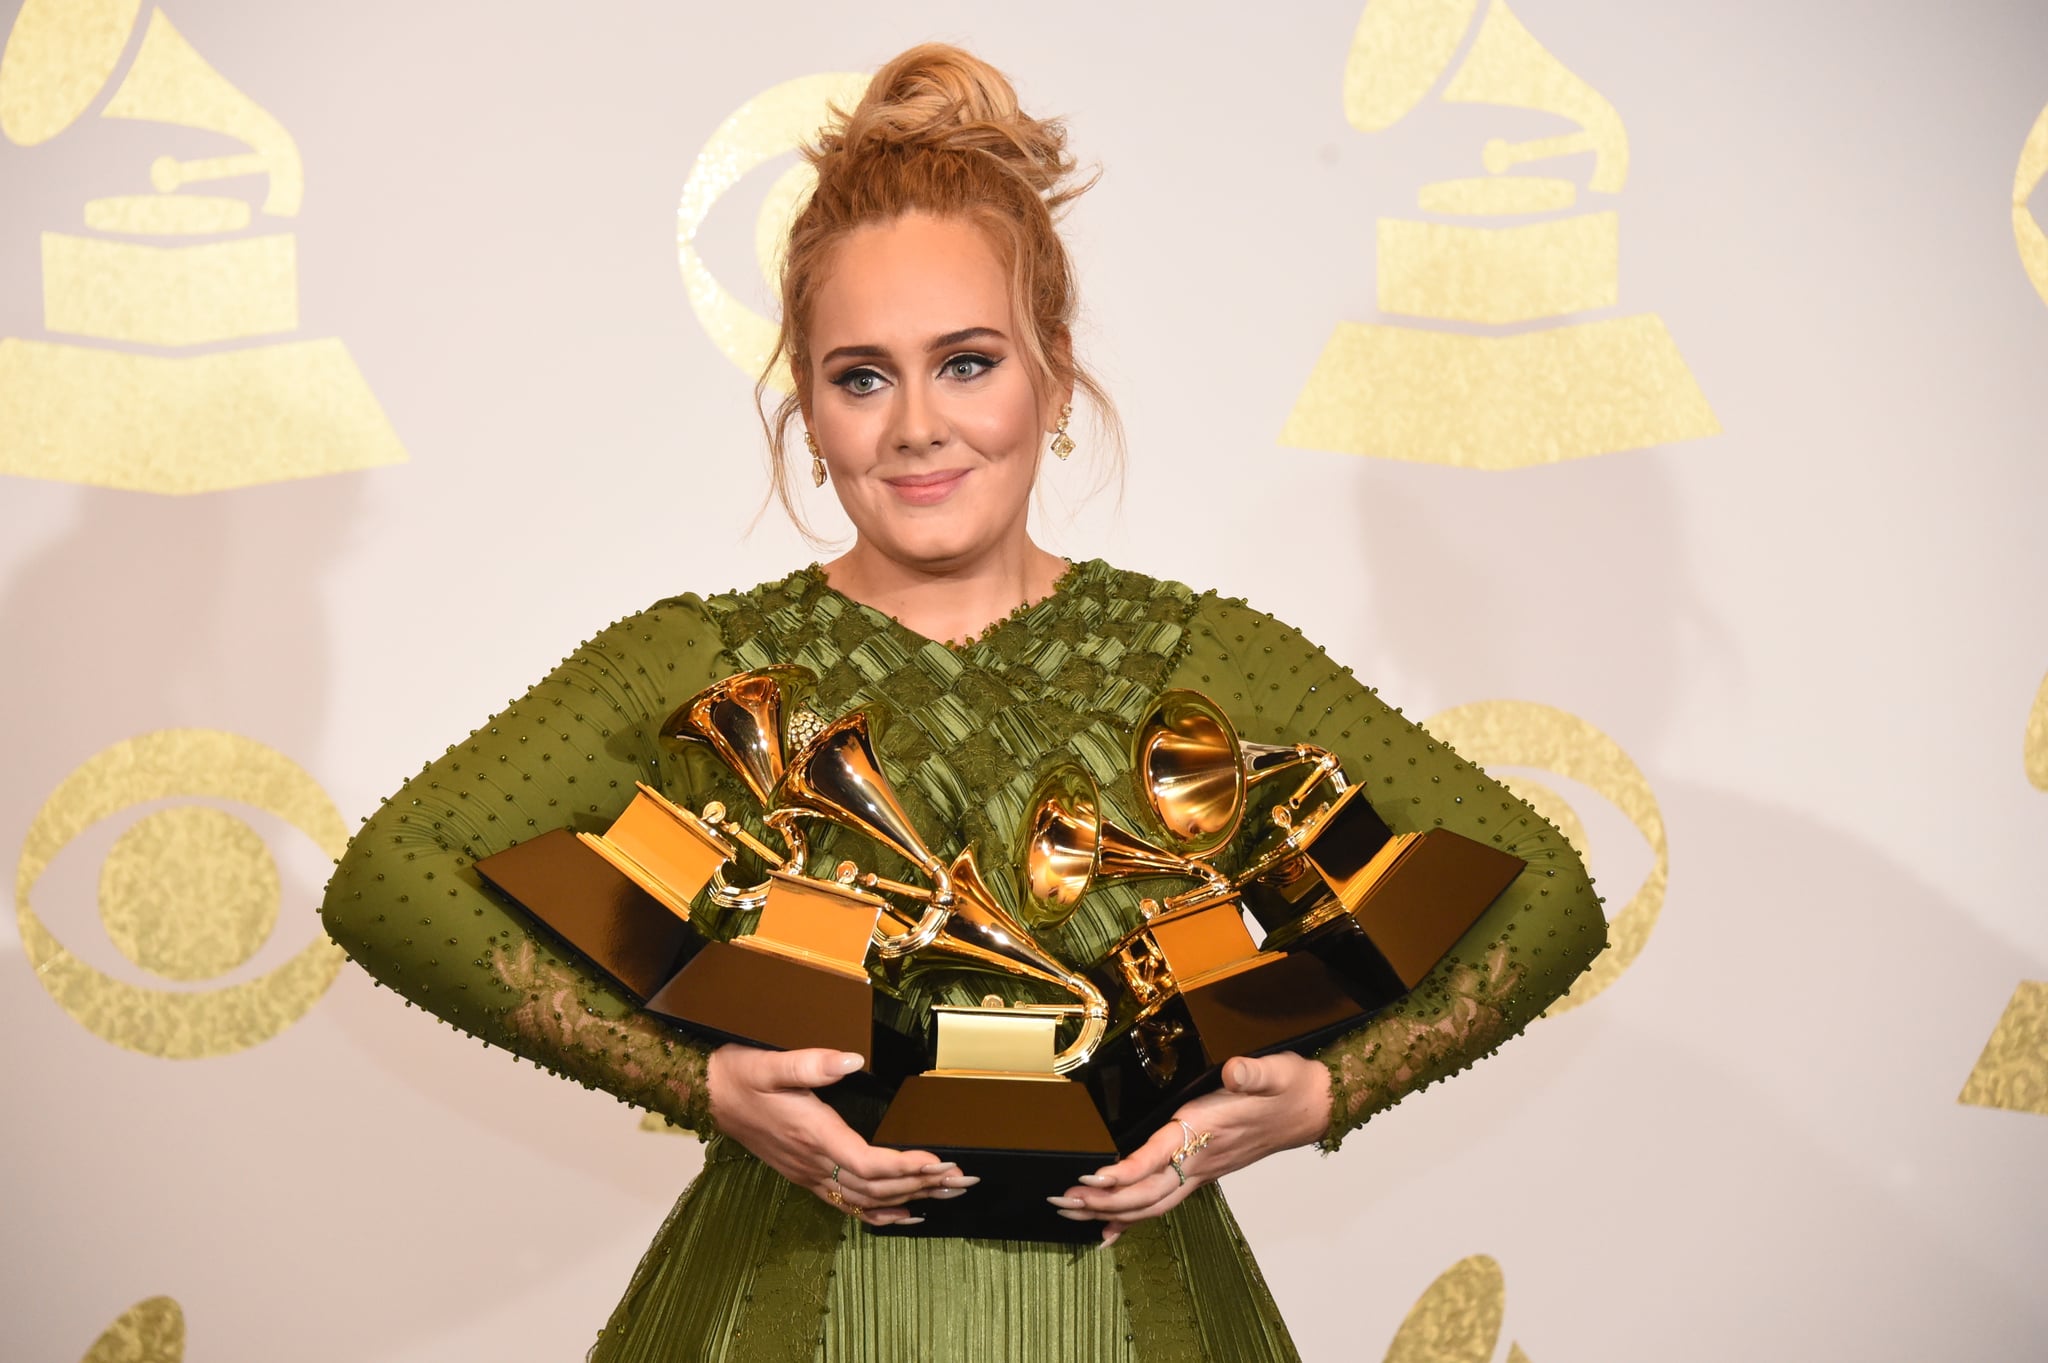 LOS ANGELES - FEBRUARY 12: Adele poses for photographs backstage at THE 59TH ANNUAL GRAMMY AWARDS, broadcast live from the STAPLES Center in Los Angeles, Sunday, Feb. 12 (8:00-11:30 PM, live ET/5:00-8:30 PM, live PT; 6:00-9:30 PM, live MT) on the CBS Television Network. (Photo by Phil McCarten/CBS via Getty Images)